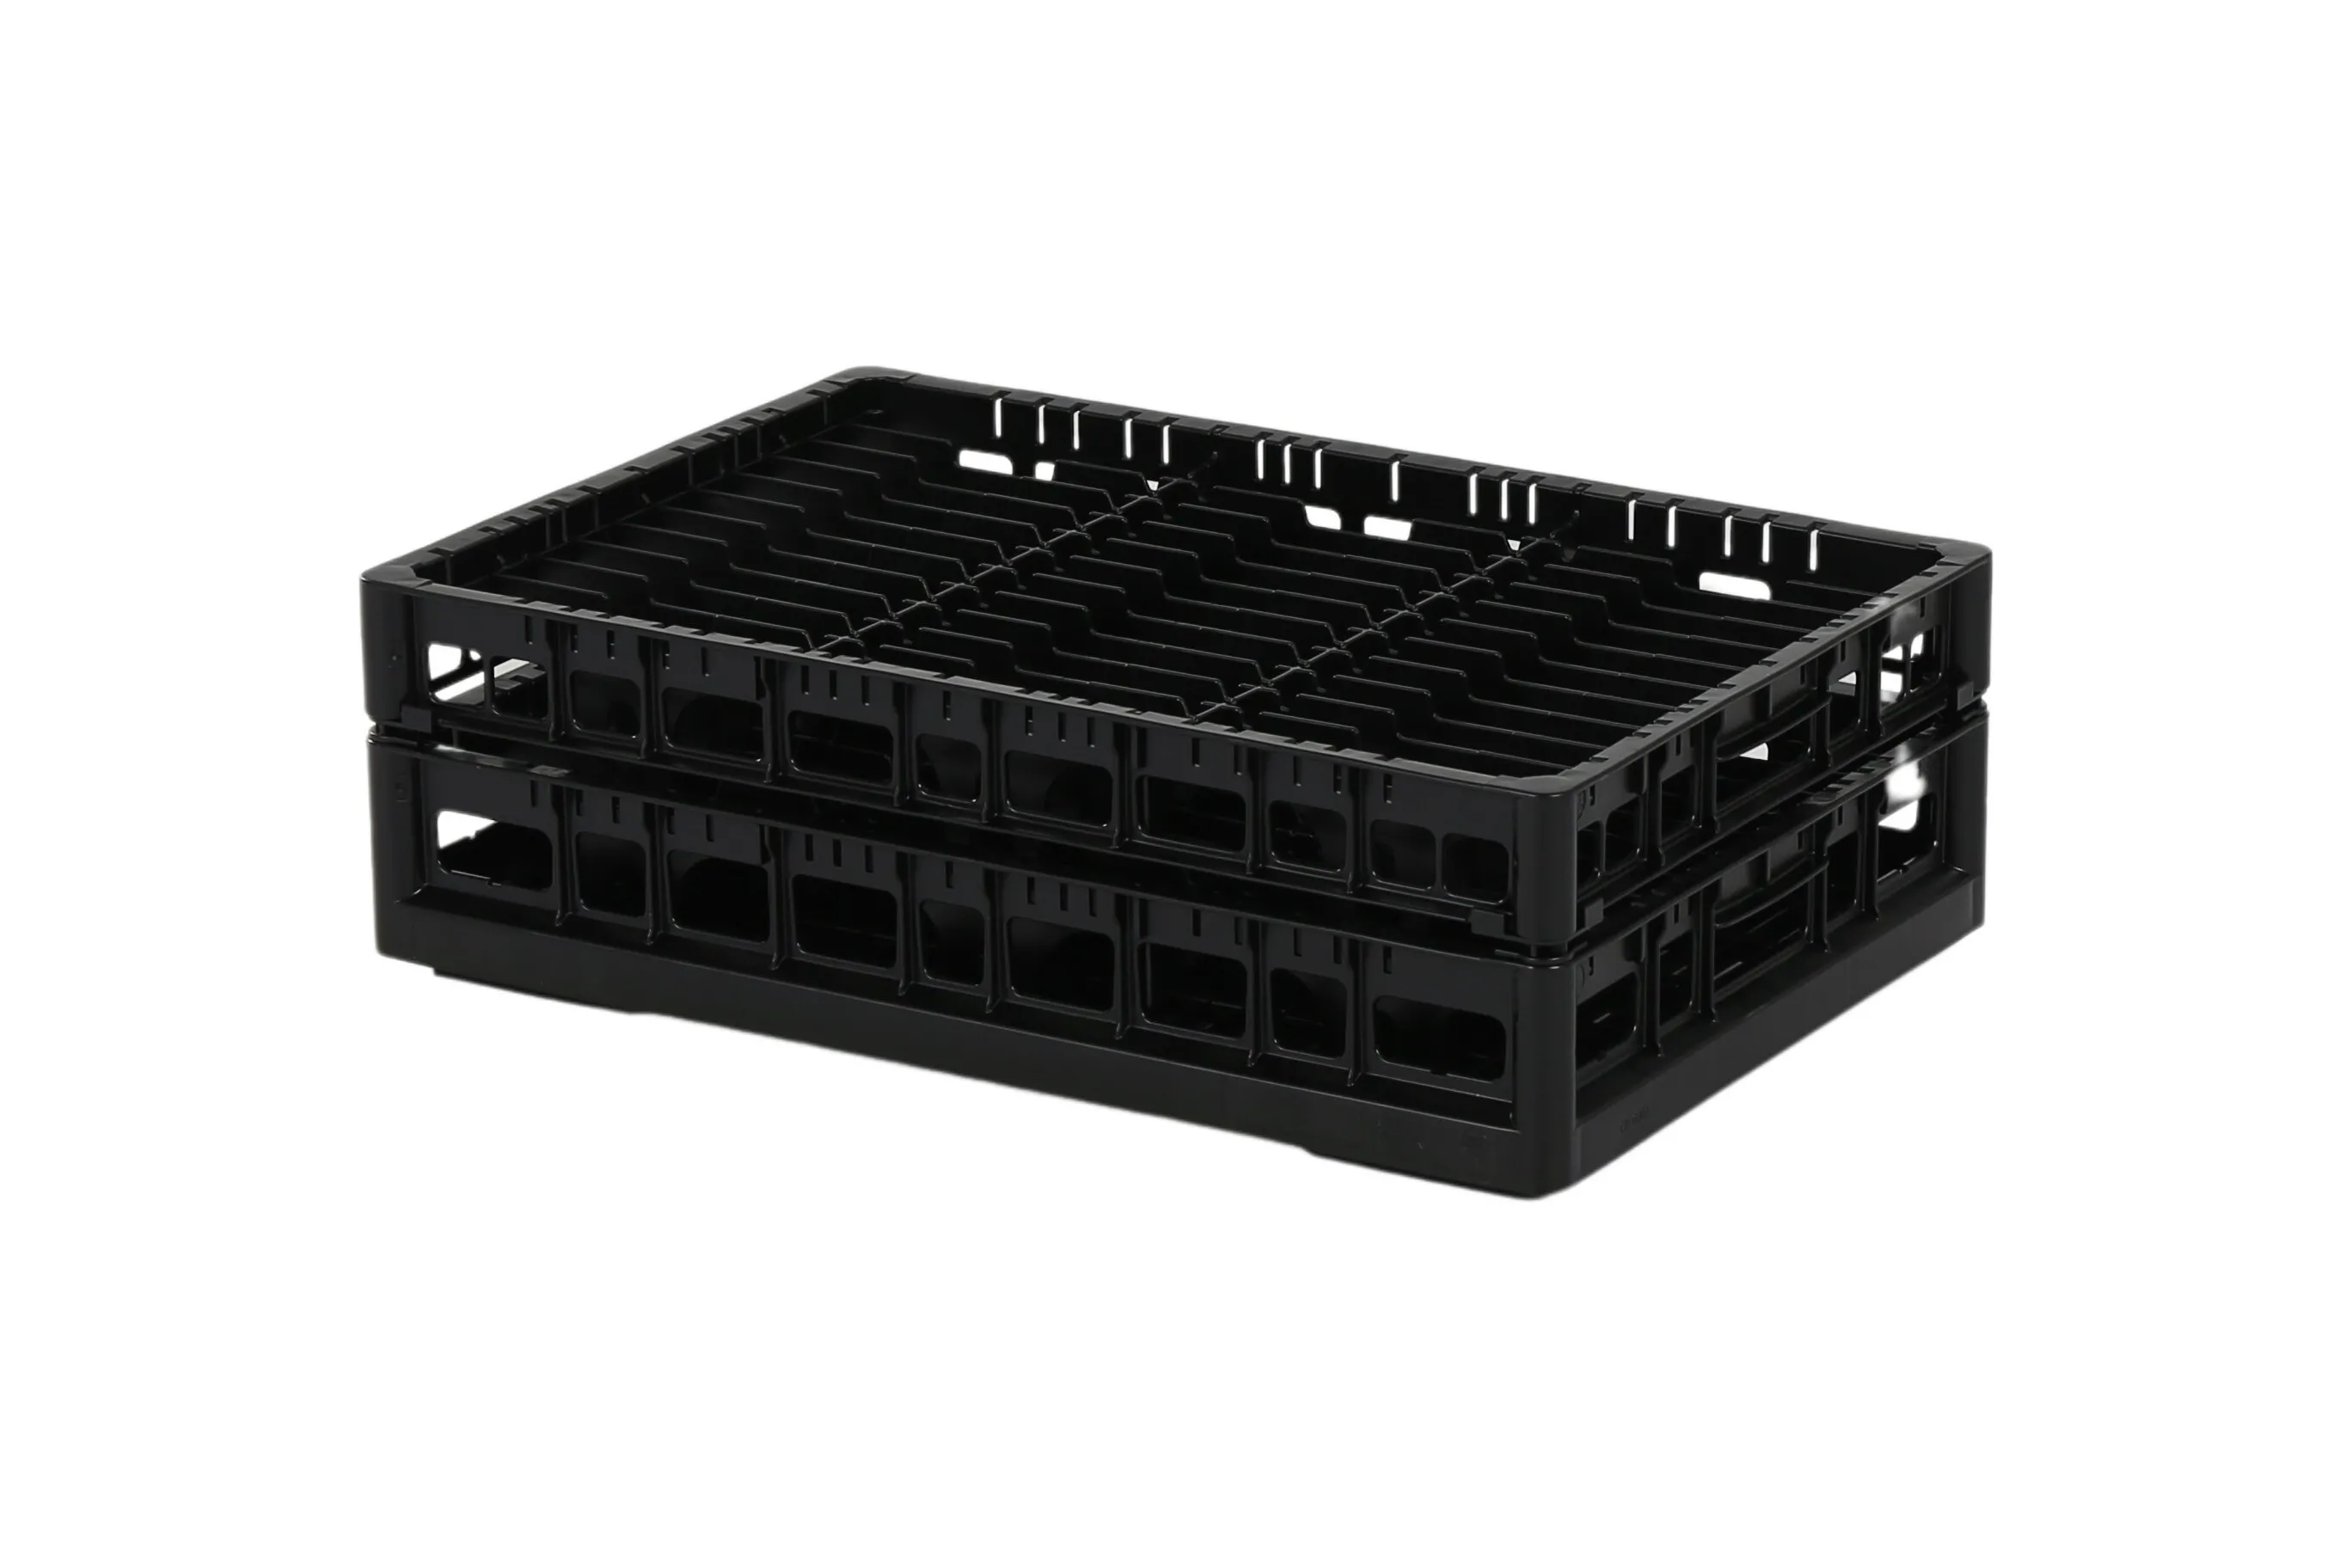 Clixrack Plate basket 600 x 400 mm black - Plate height max. 28mm - with 3 x 12 compartment division - maximum Ø plate 145 mm 